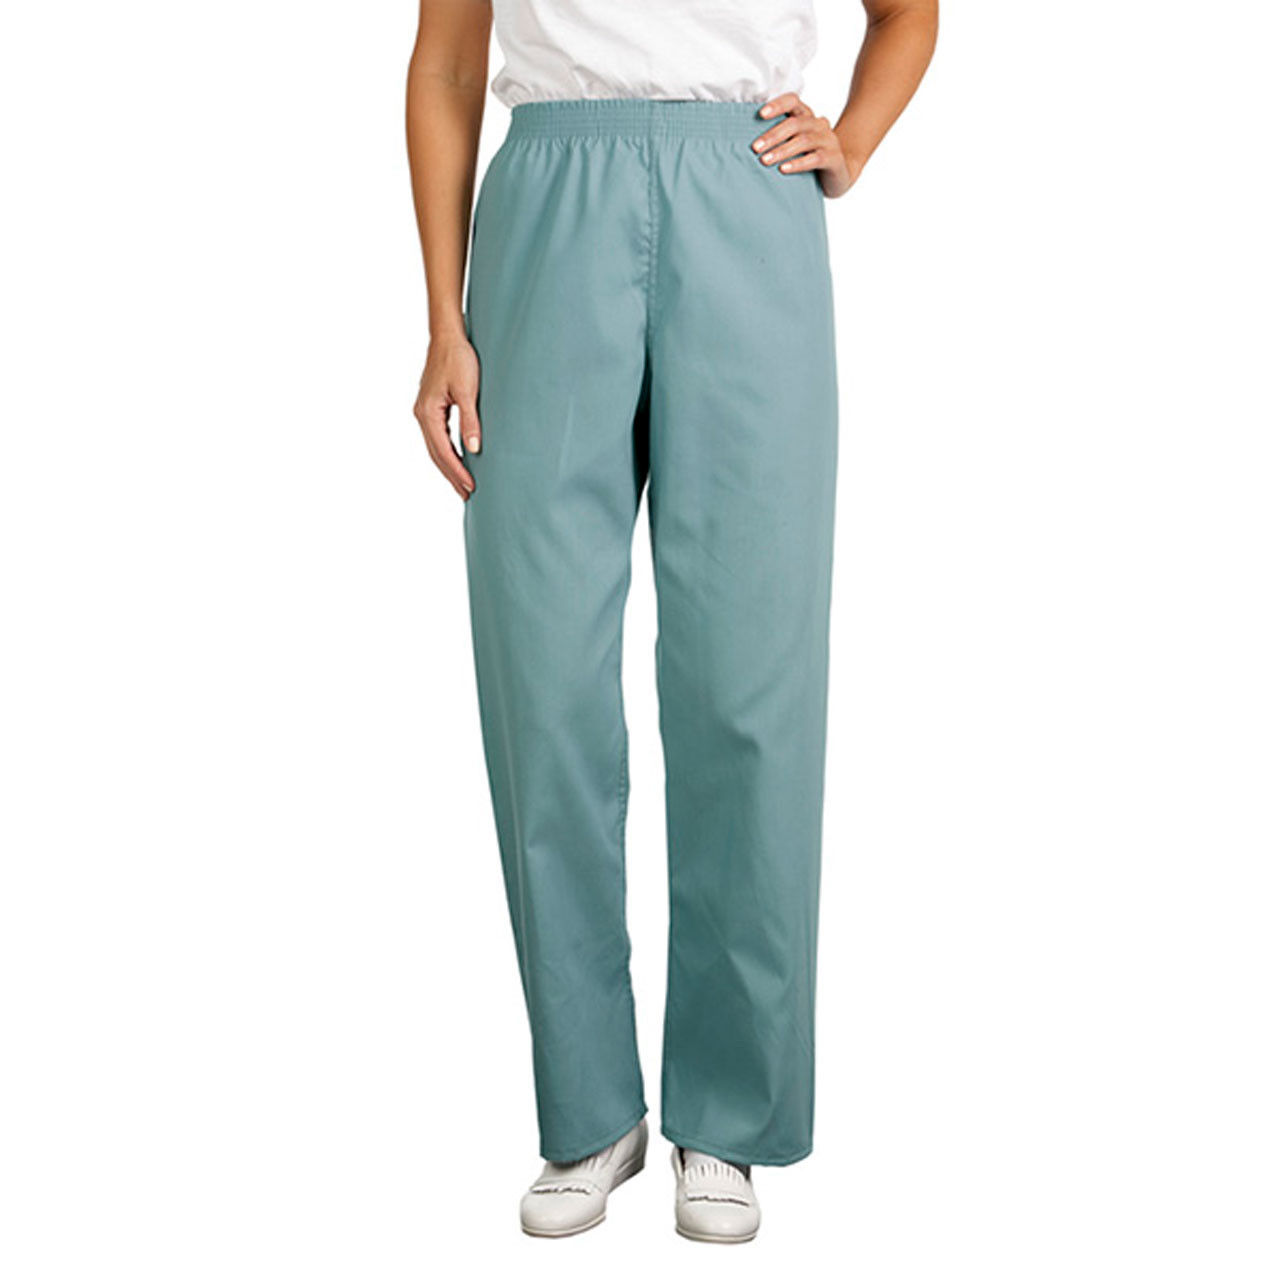 Fashion Seal Healthcare Scrub Pants, Unisex, Elastic, with Pocket, Misty Green in Bulk of 12 or 36 Questions & Answers